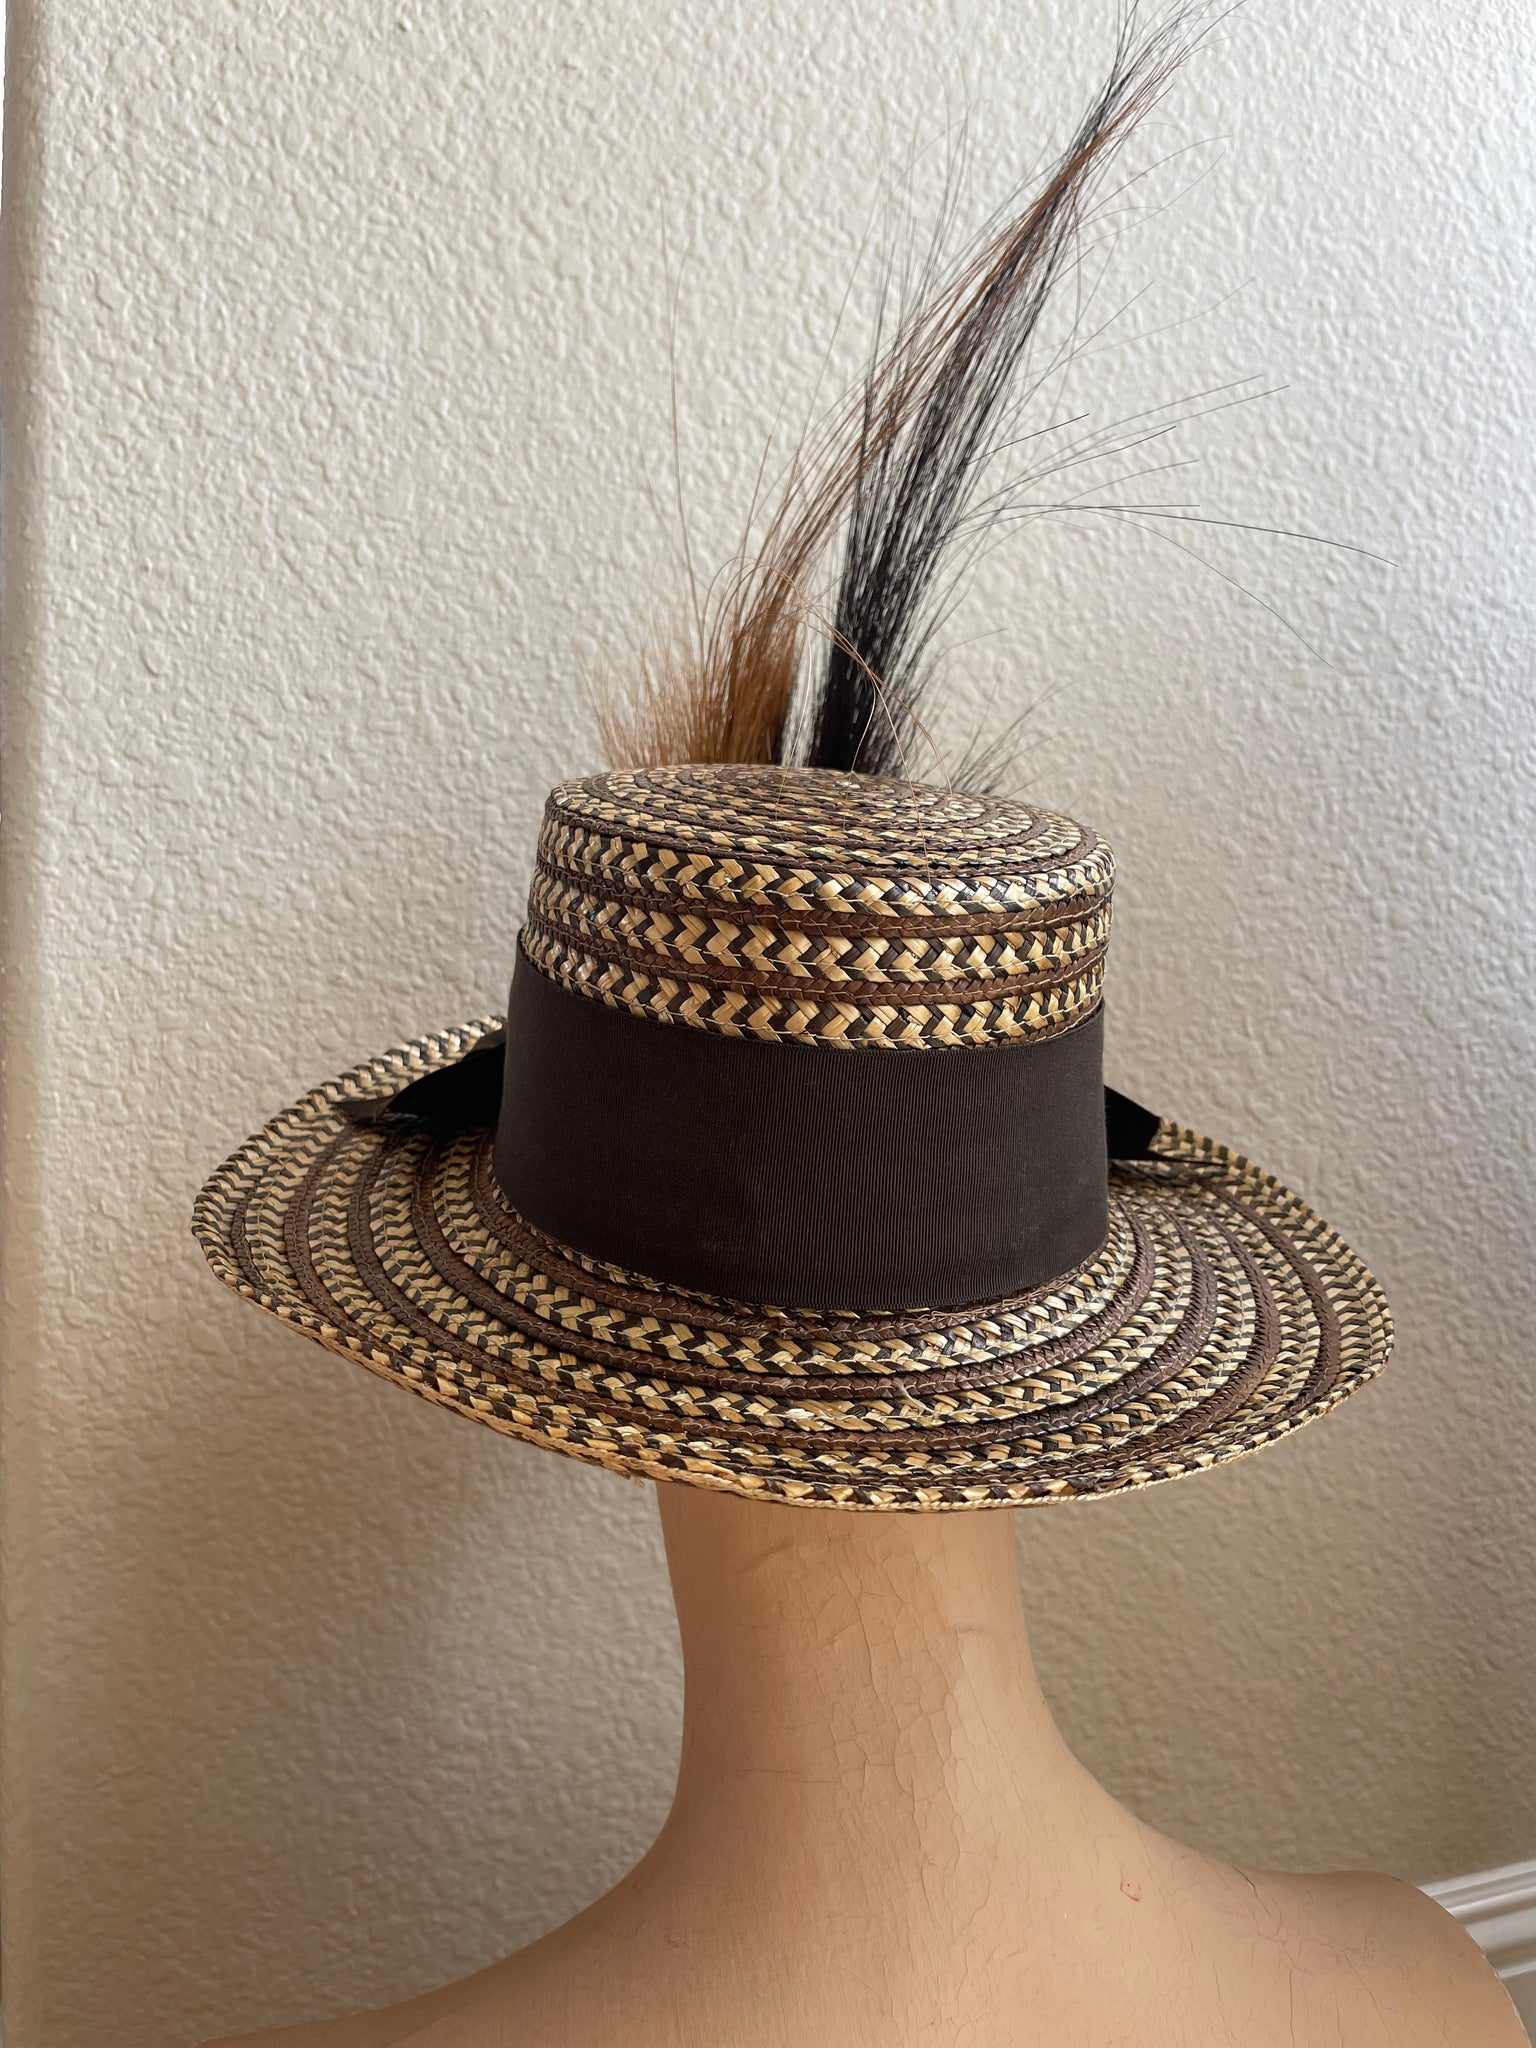 1880s Woven Straw Plume Buckle Tall Hat ( Matching Counterpart to 1880s Wool Calico Dress )